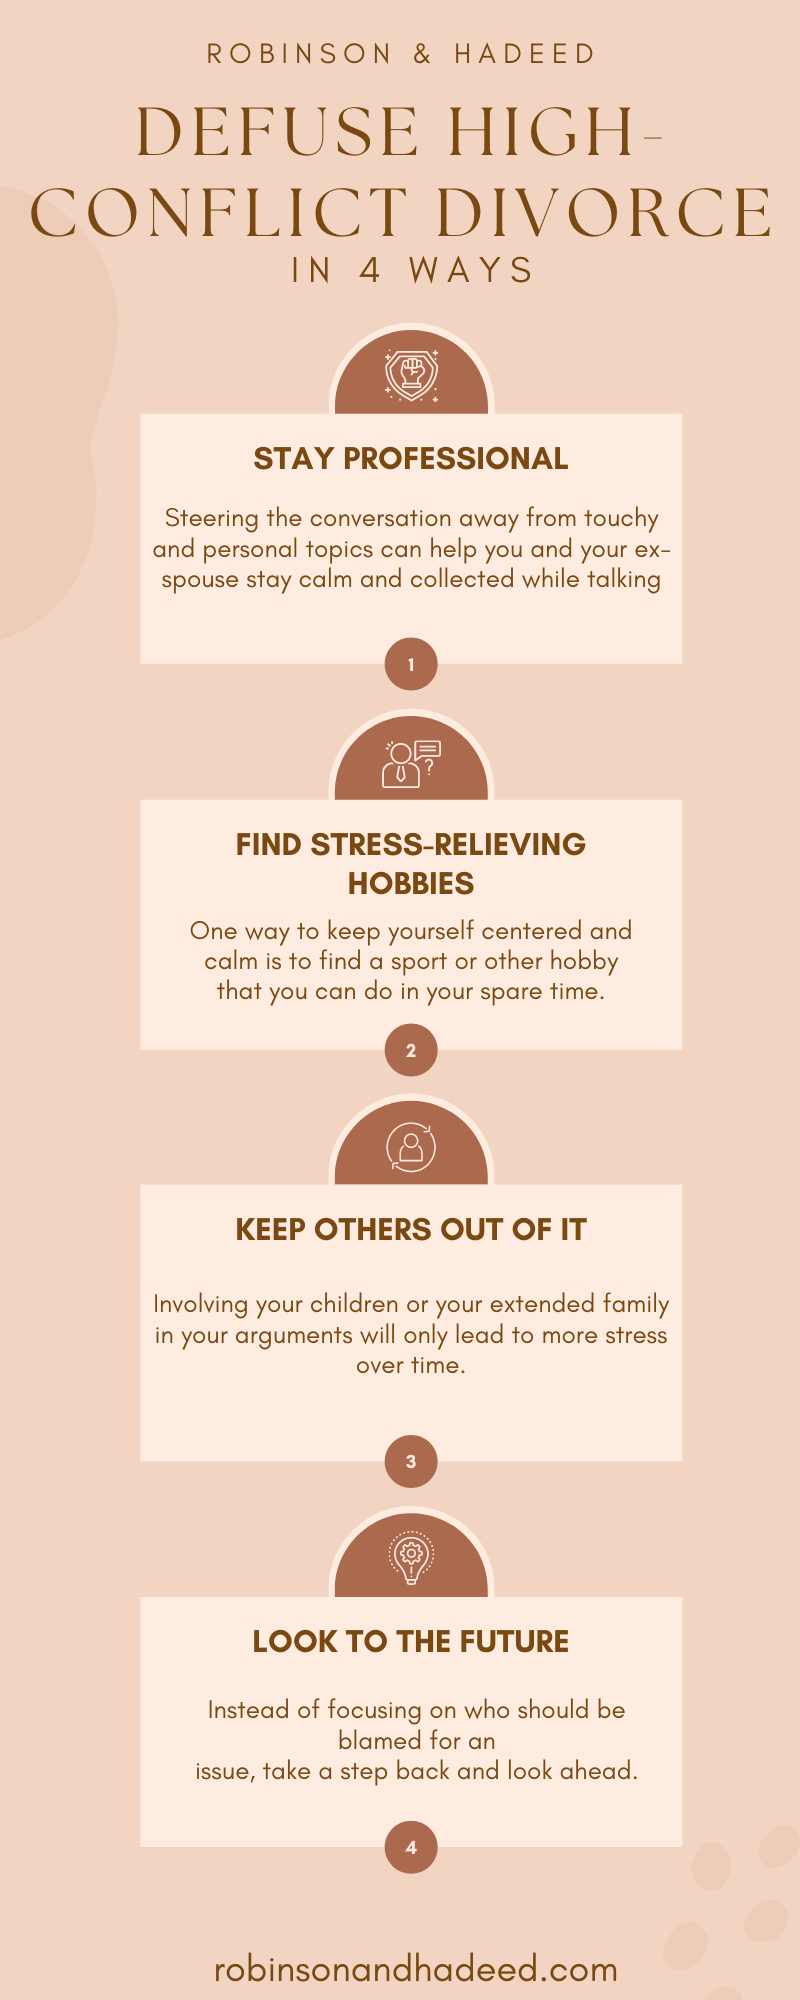 4 Factors That Can Defuse High-Conflict Divorce Infographic